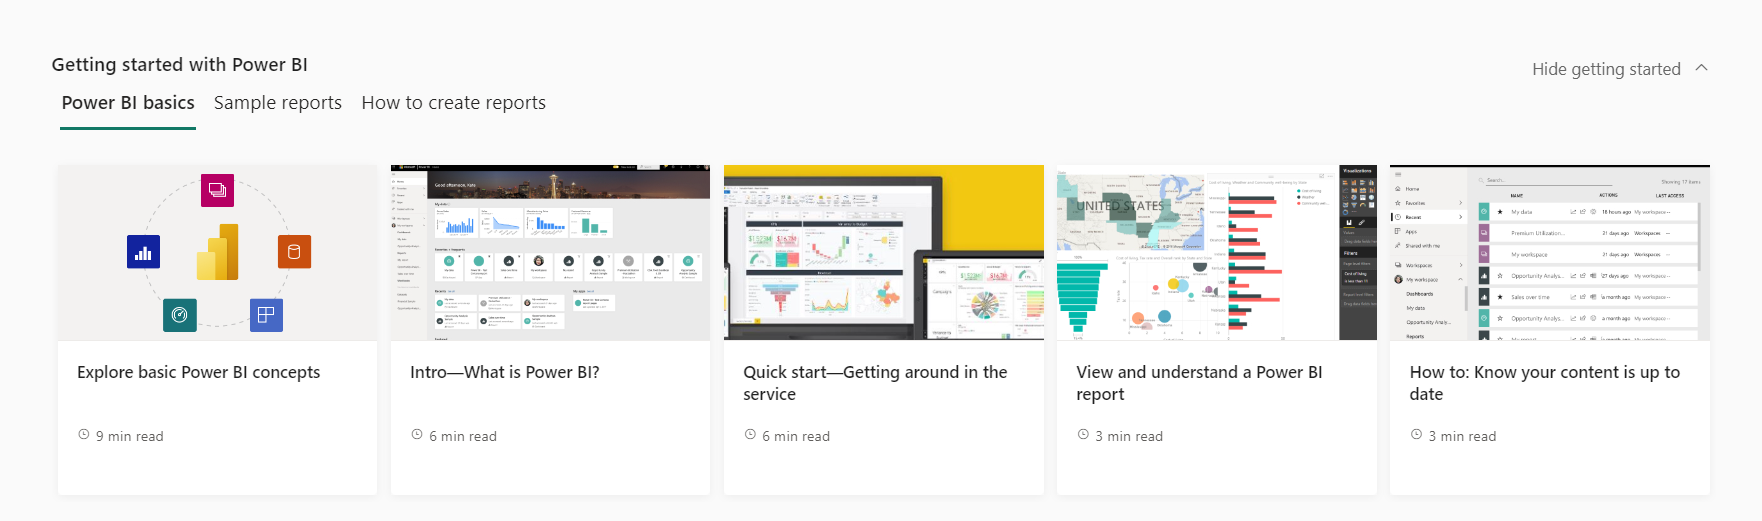 Announcing the retirement of ‘Getting Started’ in the Expanded View of the Power BI Service